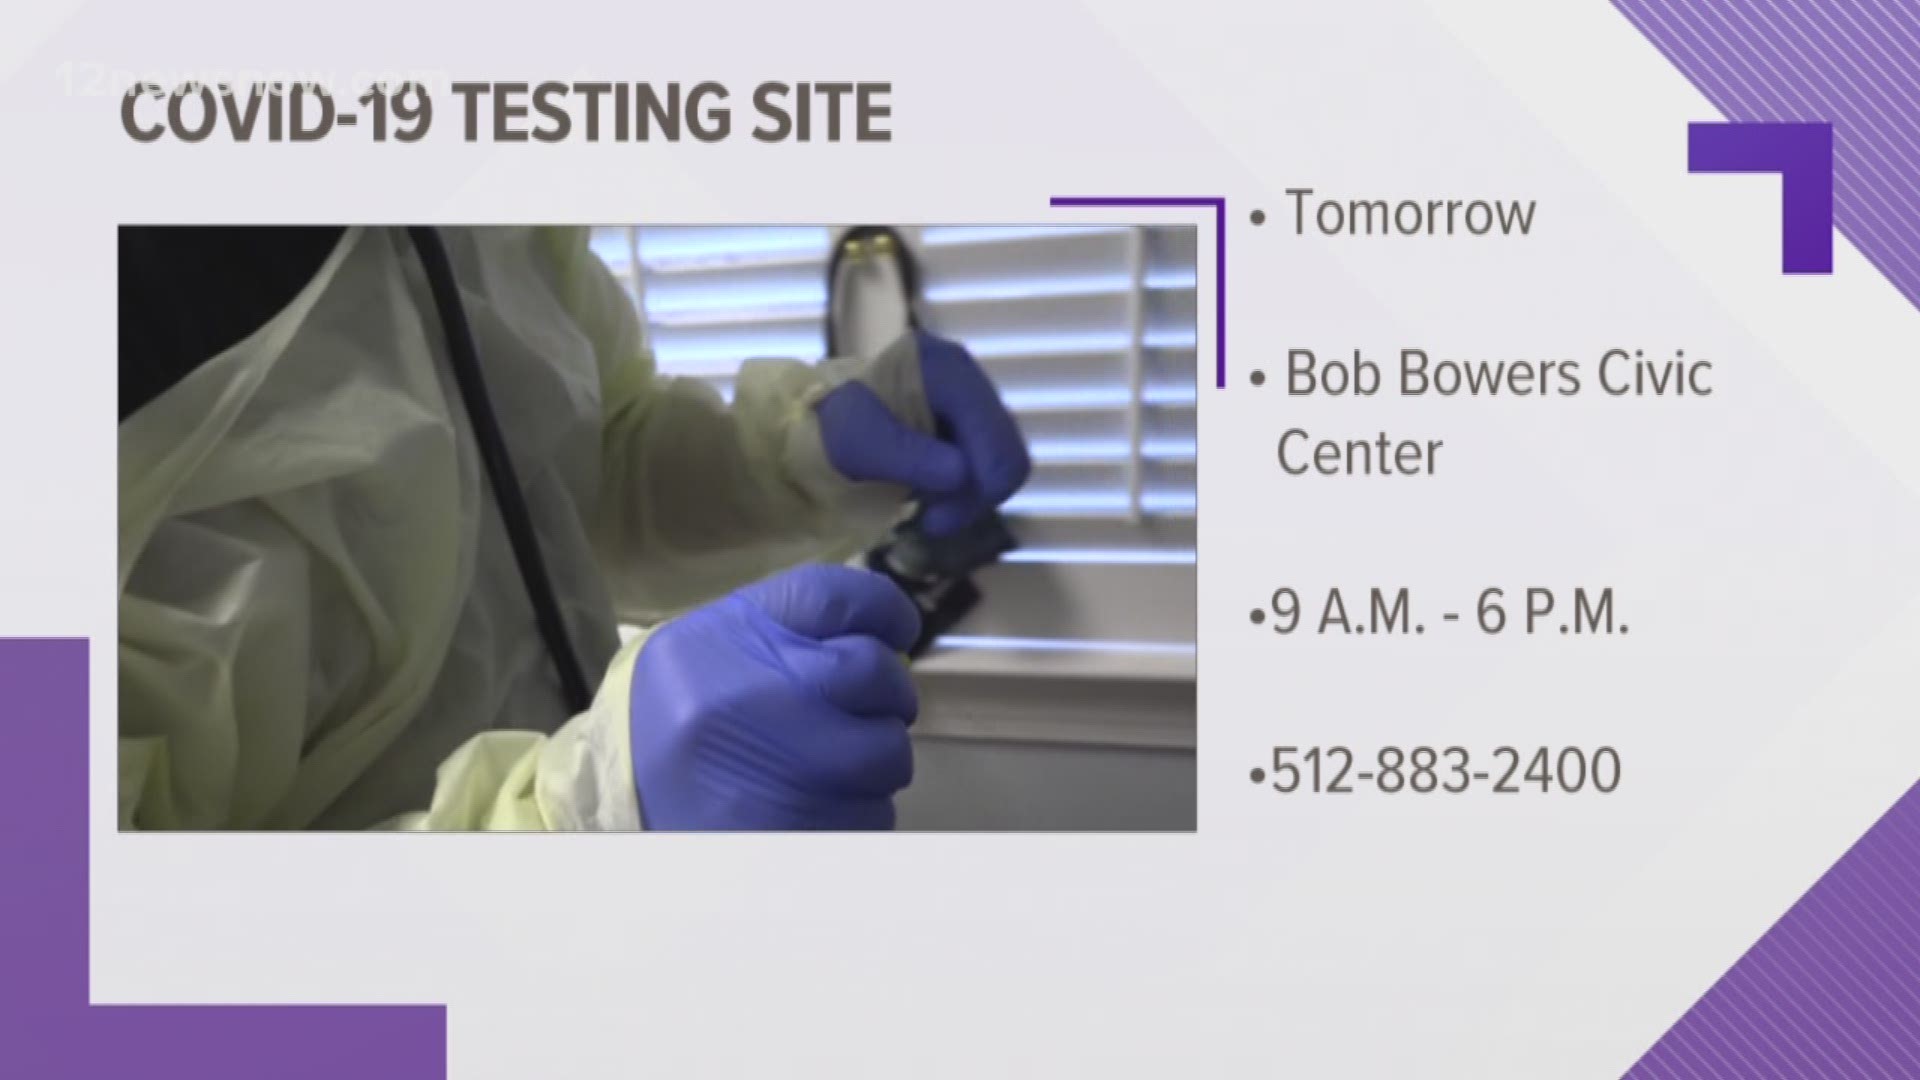 You can register to get tested by calling the state number at (512) 883-2400.